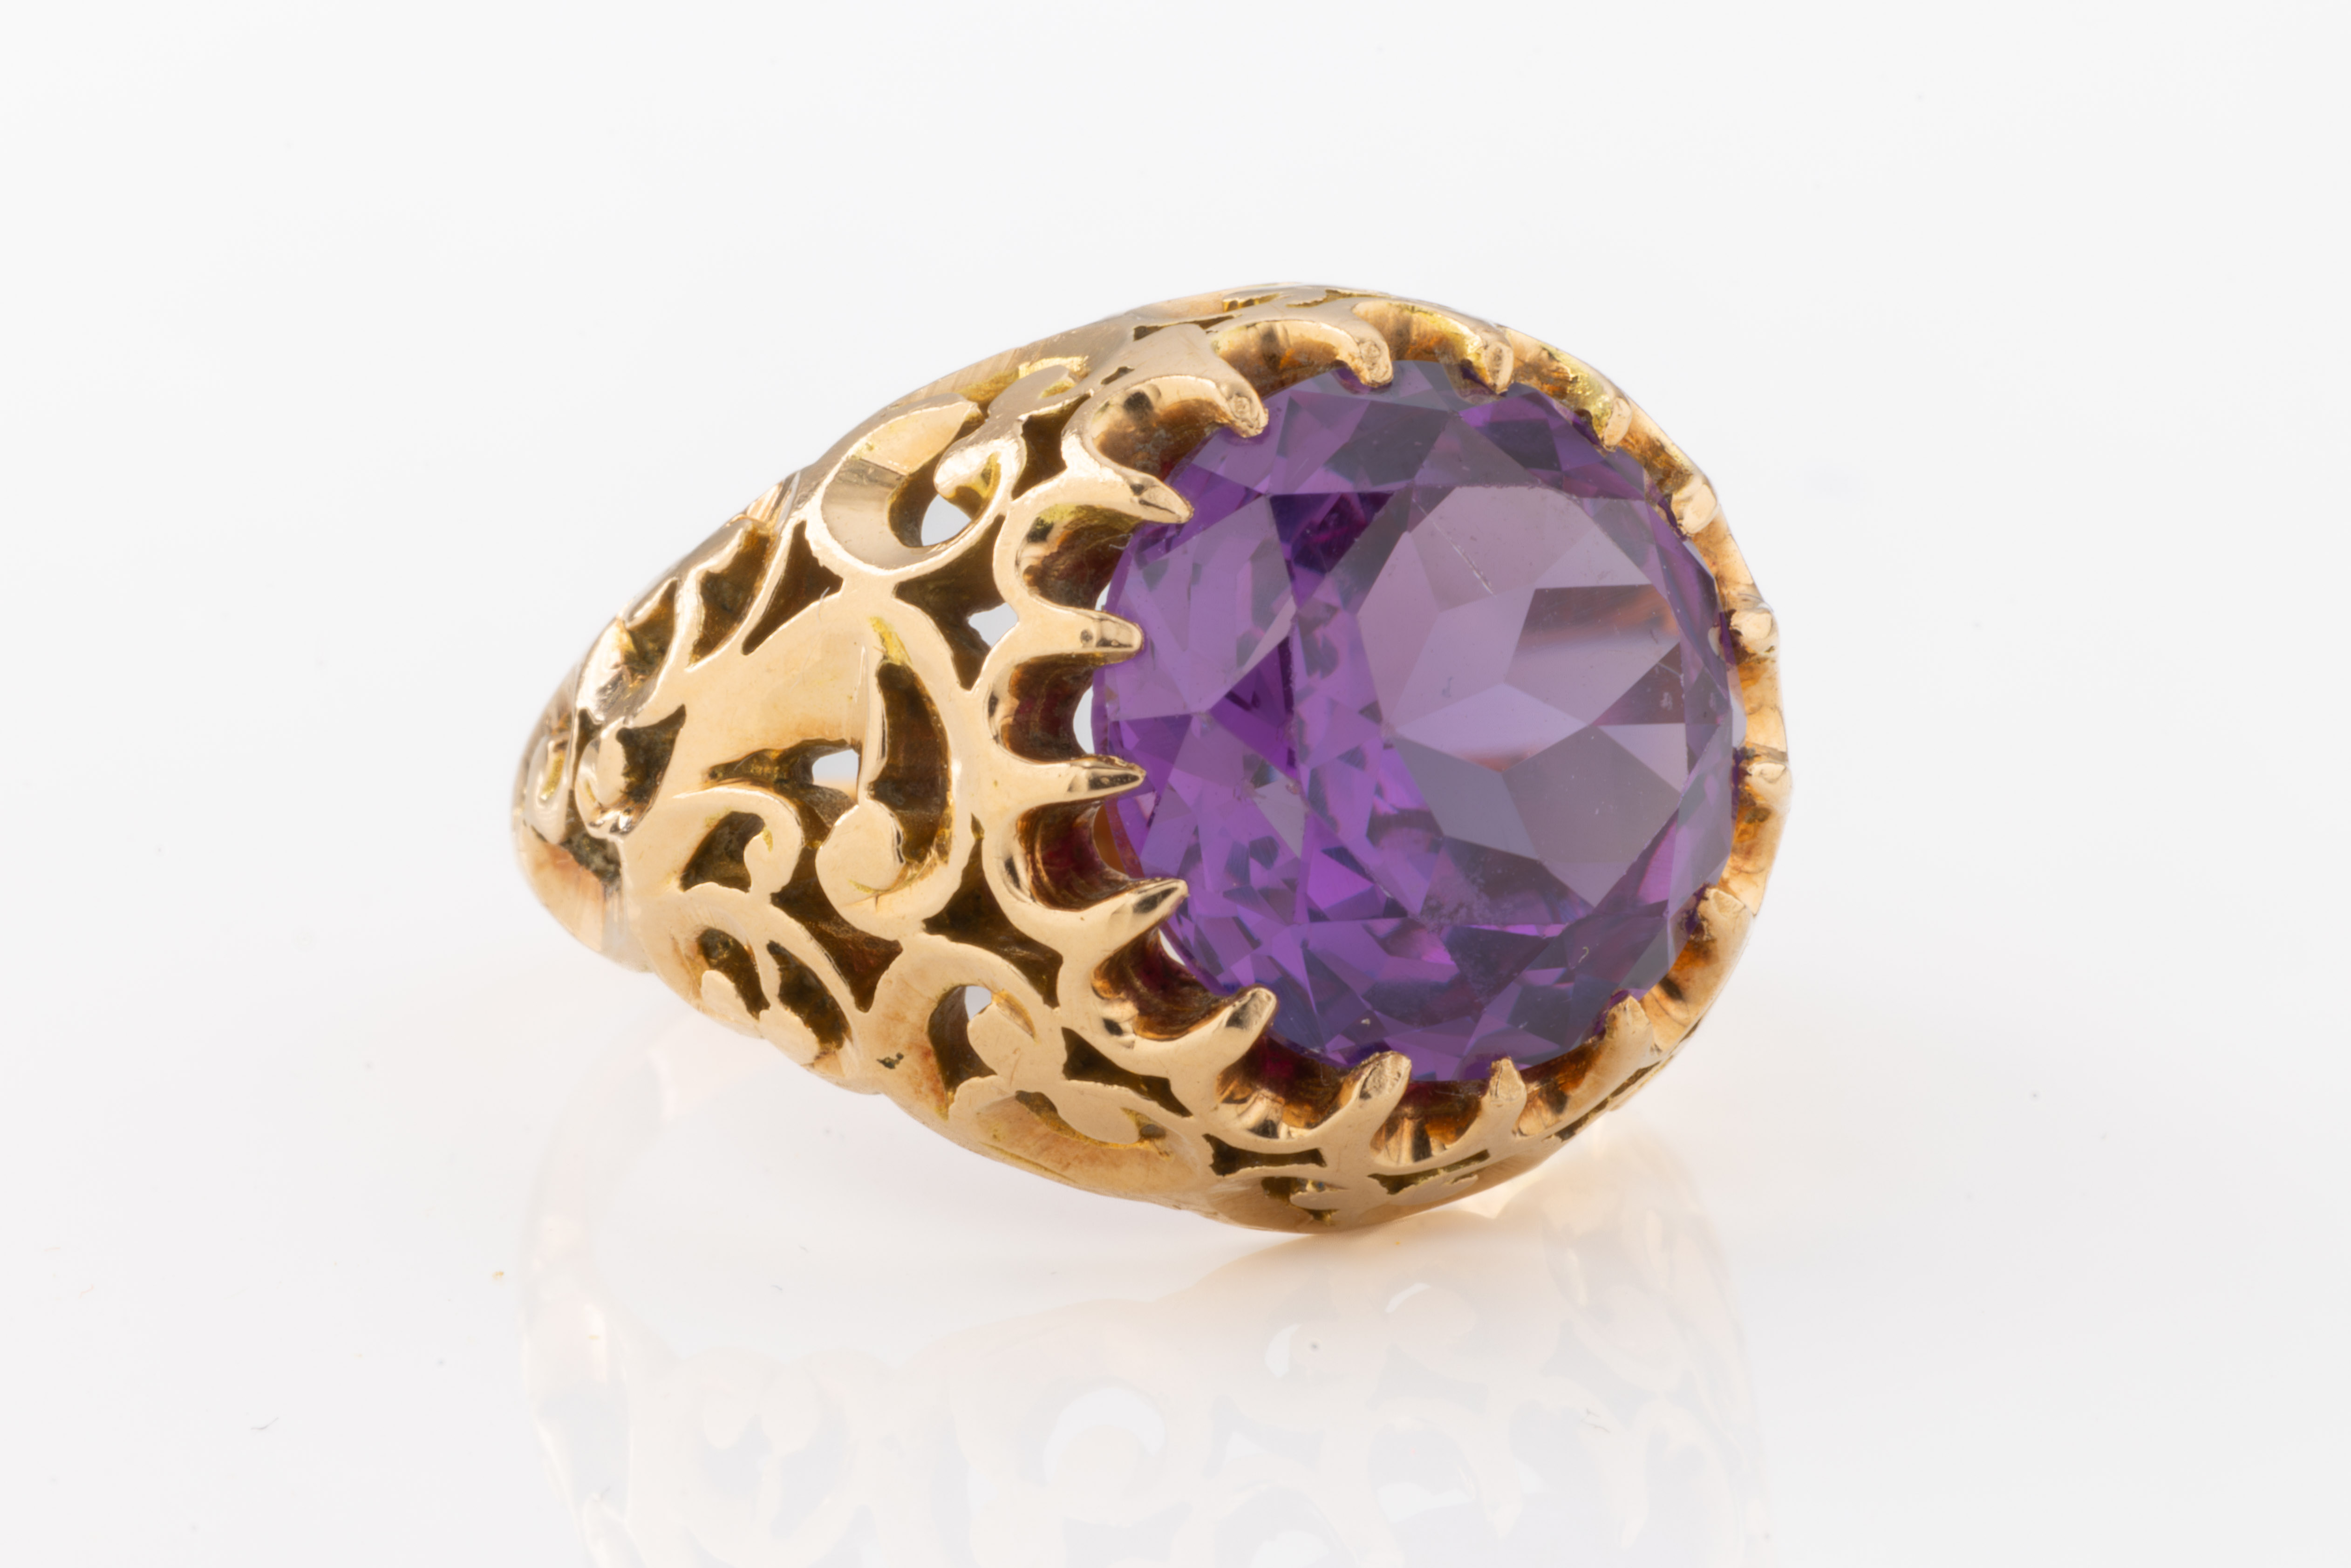 A gold and purple stone ring